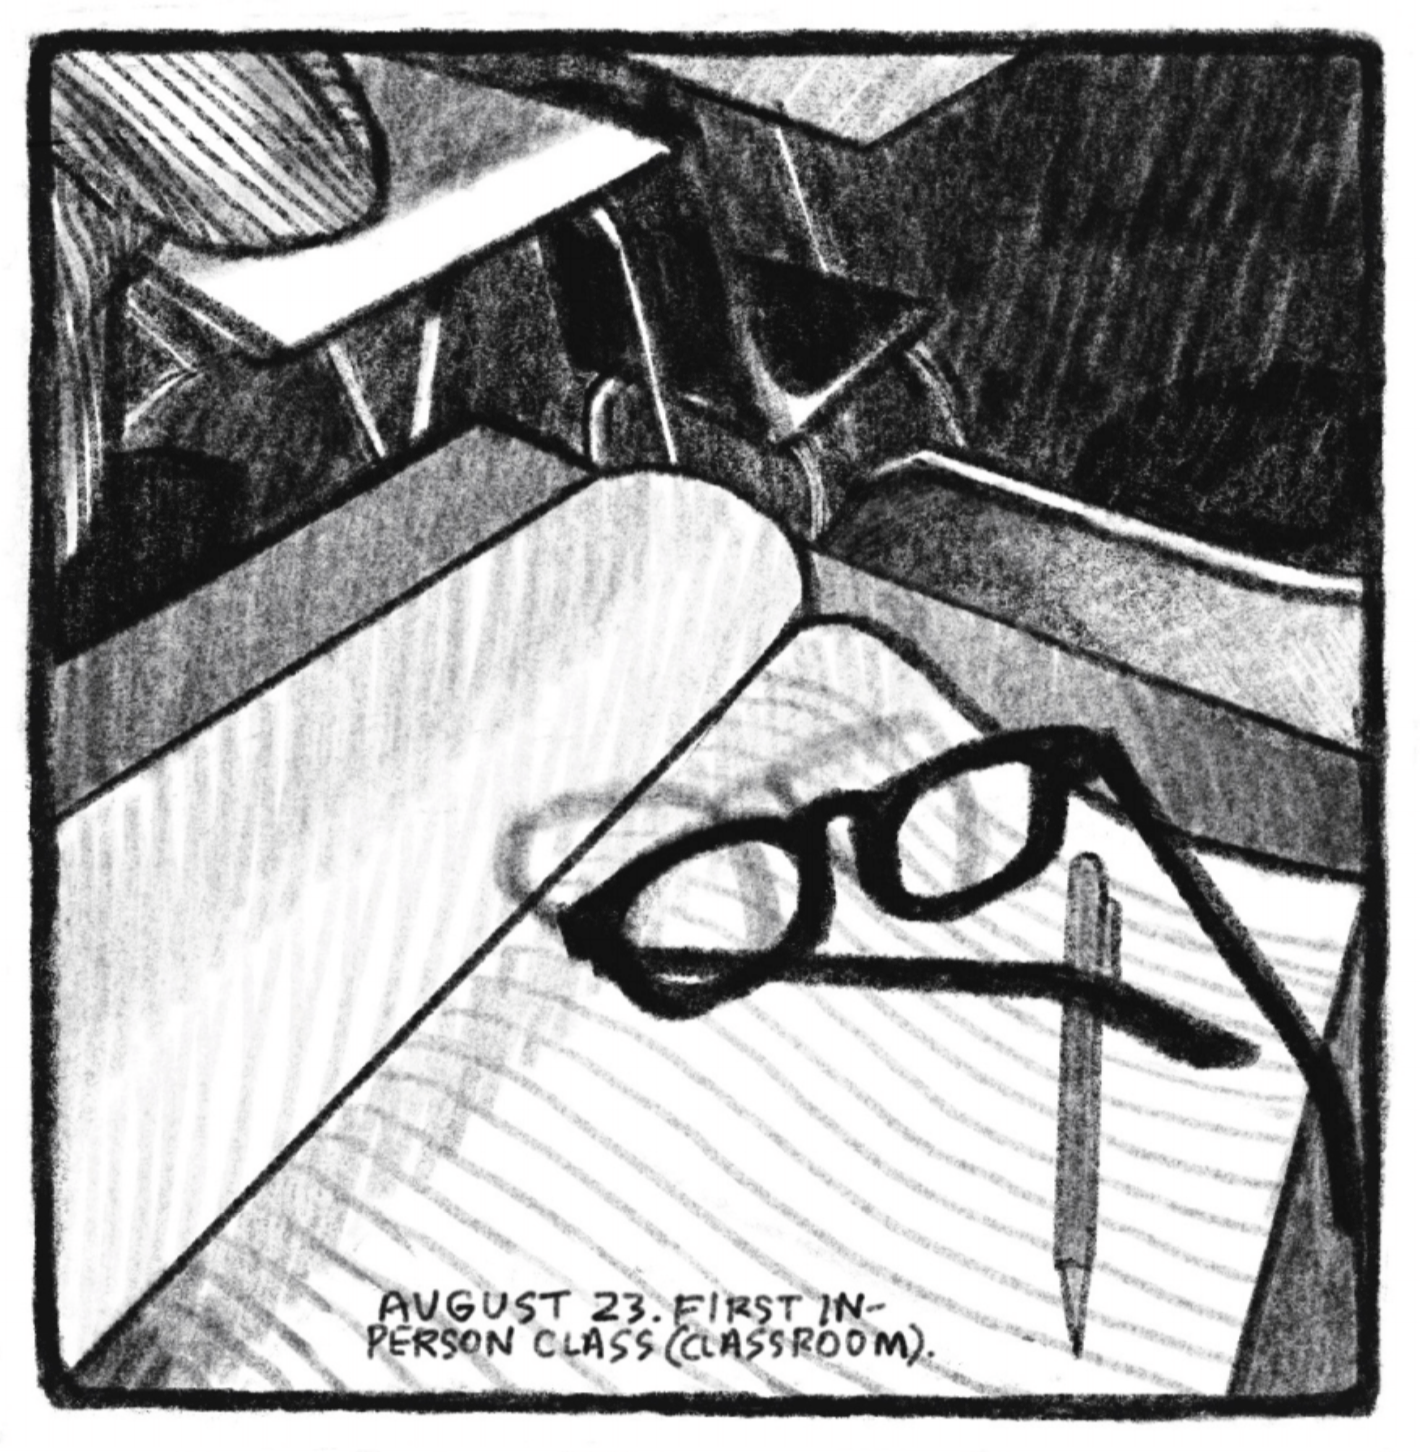 A close-up shot of an open, blank spiral notebook topped with a pair of glasses and a mechanical pencil, all sitting on a school desk. Other desks are visible in the background; someone rests their elbow on theirs. â€œAugust 23. First in-person class (classroom).â€